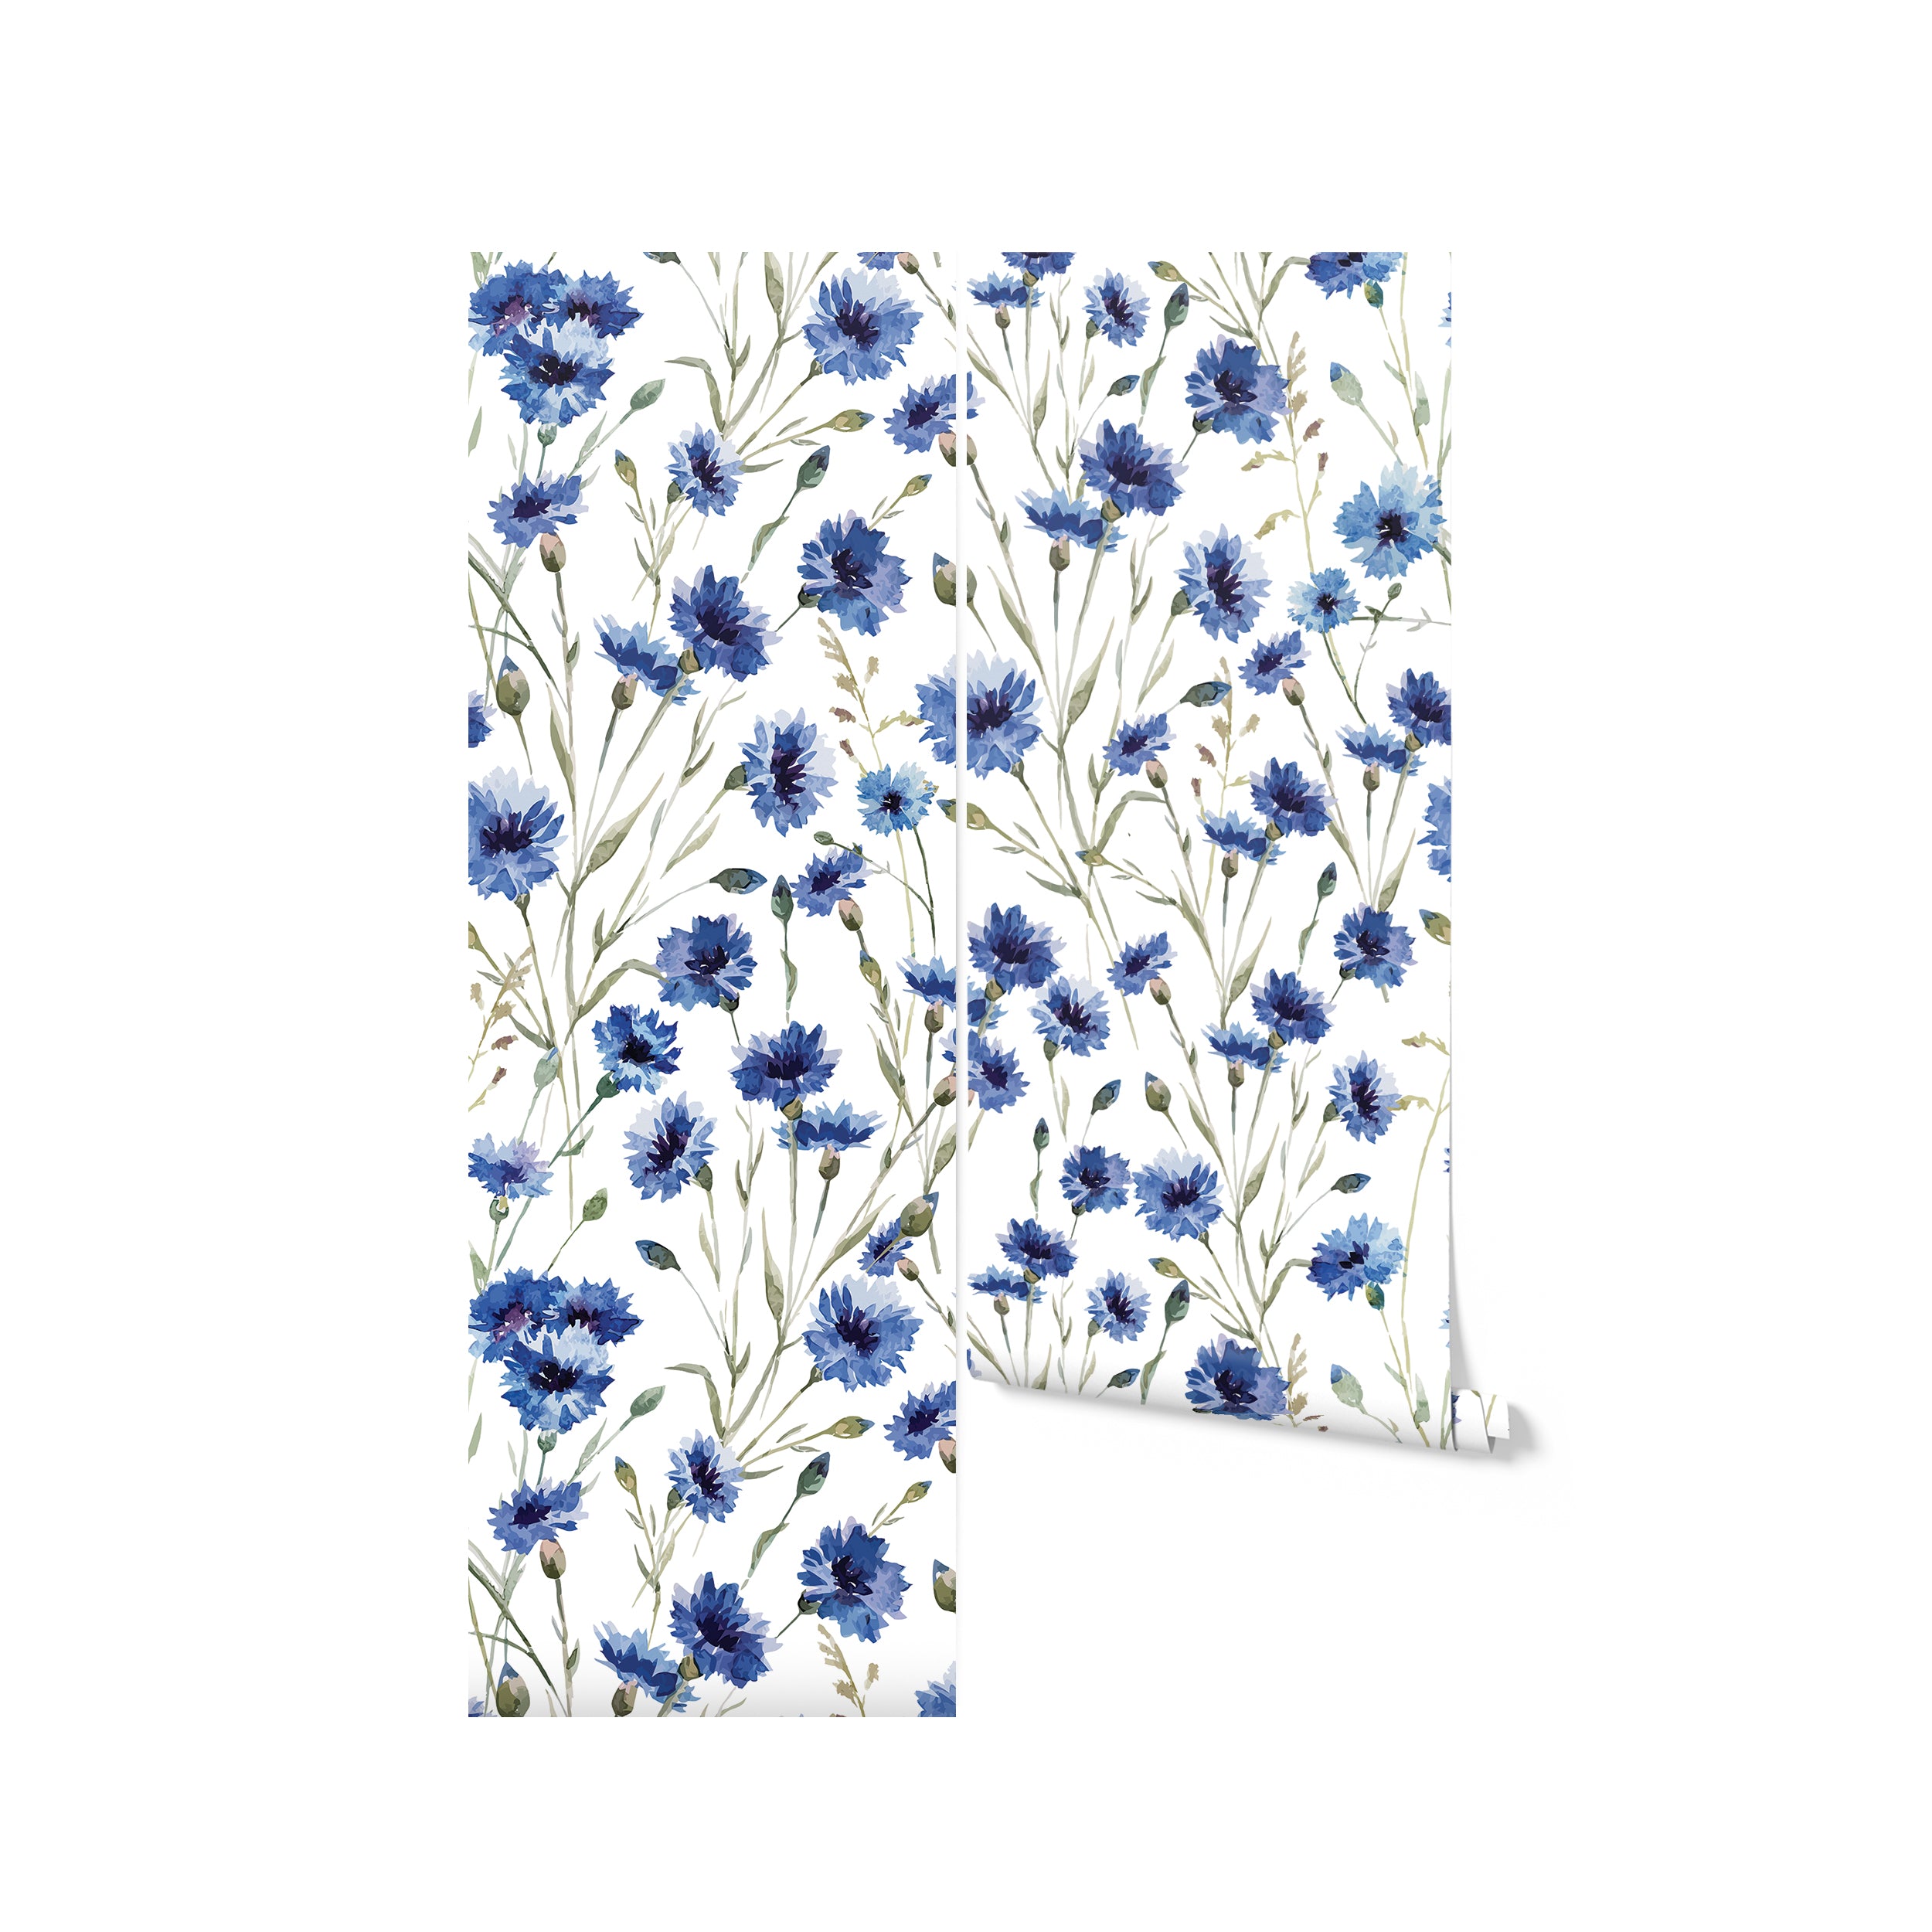 An unrolled roll of 'Hand Painted Blue Floral Wallpaper' showcasing a repeating pattern of bold blue flowers and greenery, ready to transform any room with a splash of hand-painted charm and vivid color